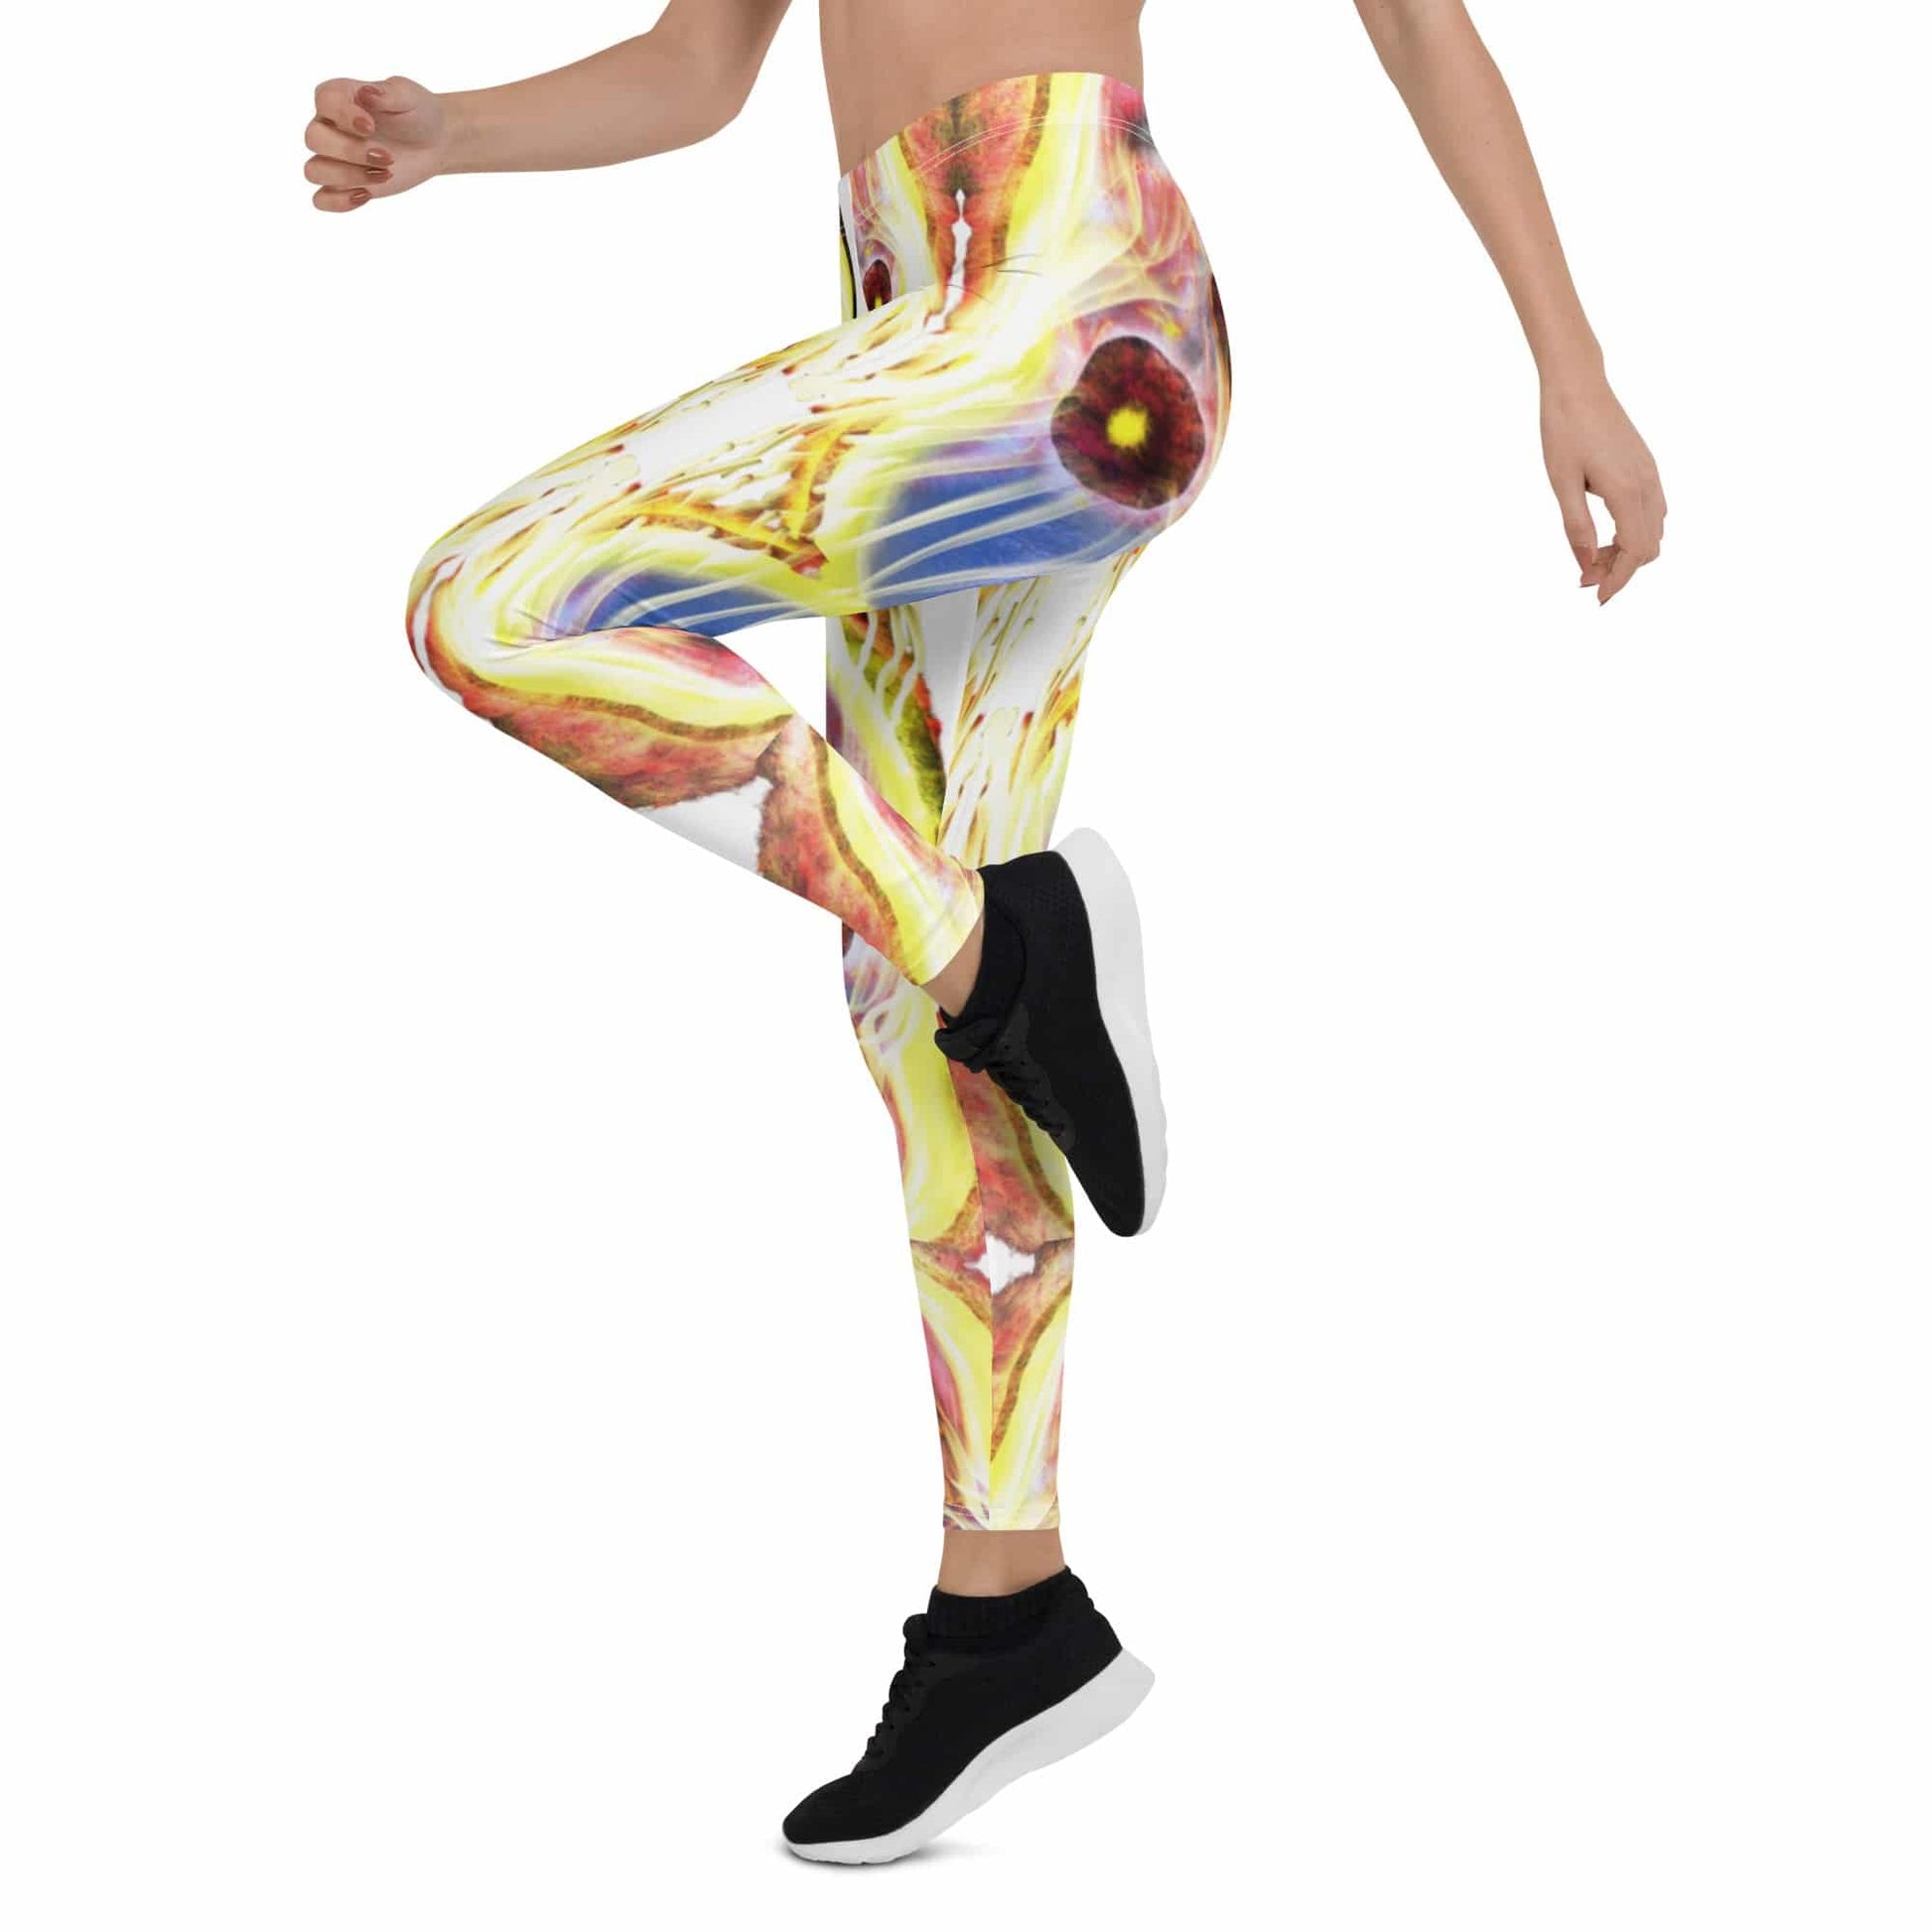 Indulge in Pure Bliss with Heavenly Leggings - Revel under the Sun's Warm Embrace, Protected by UPF 50+ - A Magical Piece of Ethical Craftsmanship. - Guy Christopher